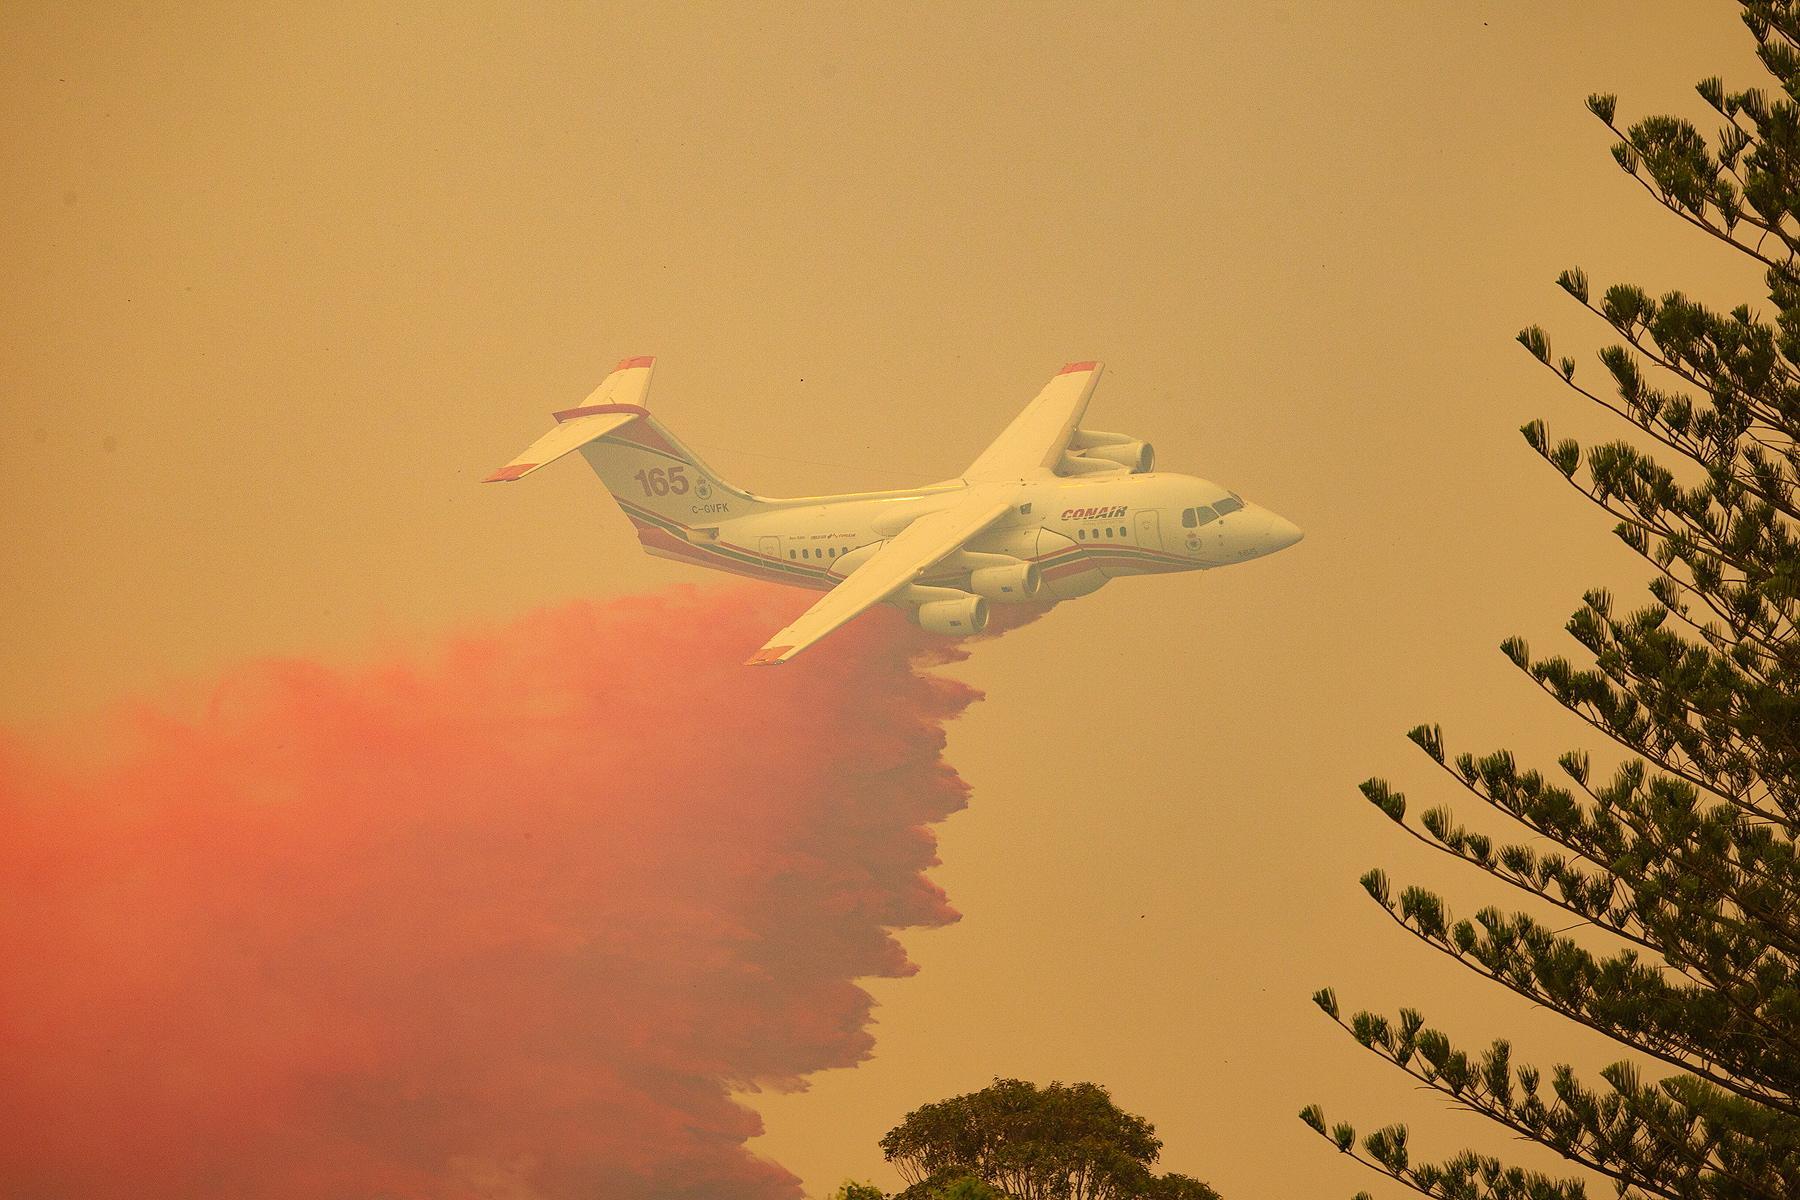 epa07980442 A water tanker airplane drops fire retardant on a bushfire in Harrington, New South Wales, Australia, 08 November 2019. Hot, windy conditions are wreaking havoc as bushfires burn out of control across parts of New South Wales, with 15 current emergency warnings in the state.  EPA/SHANE CHALKER AUSTRALIA AND NEW ZEALAND OUT